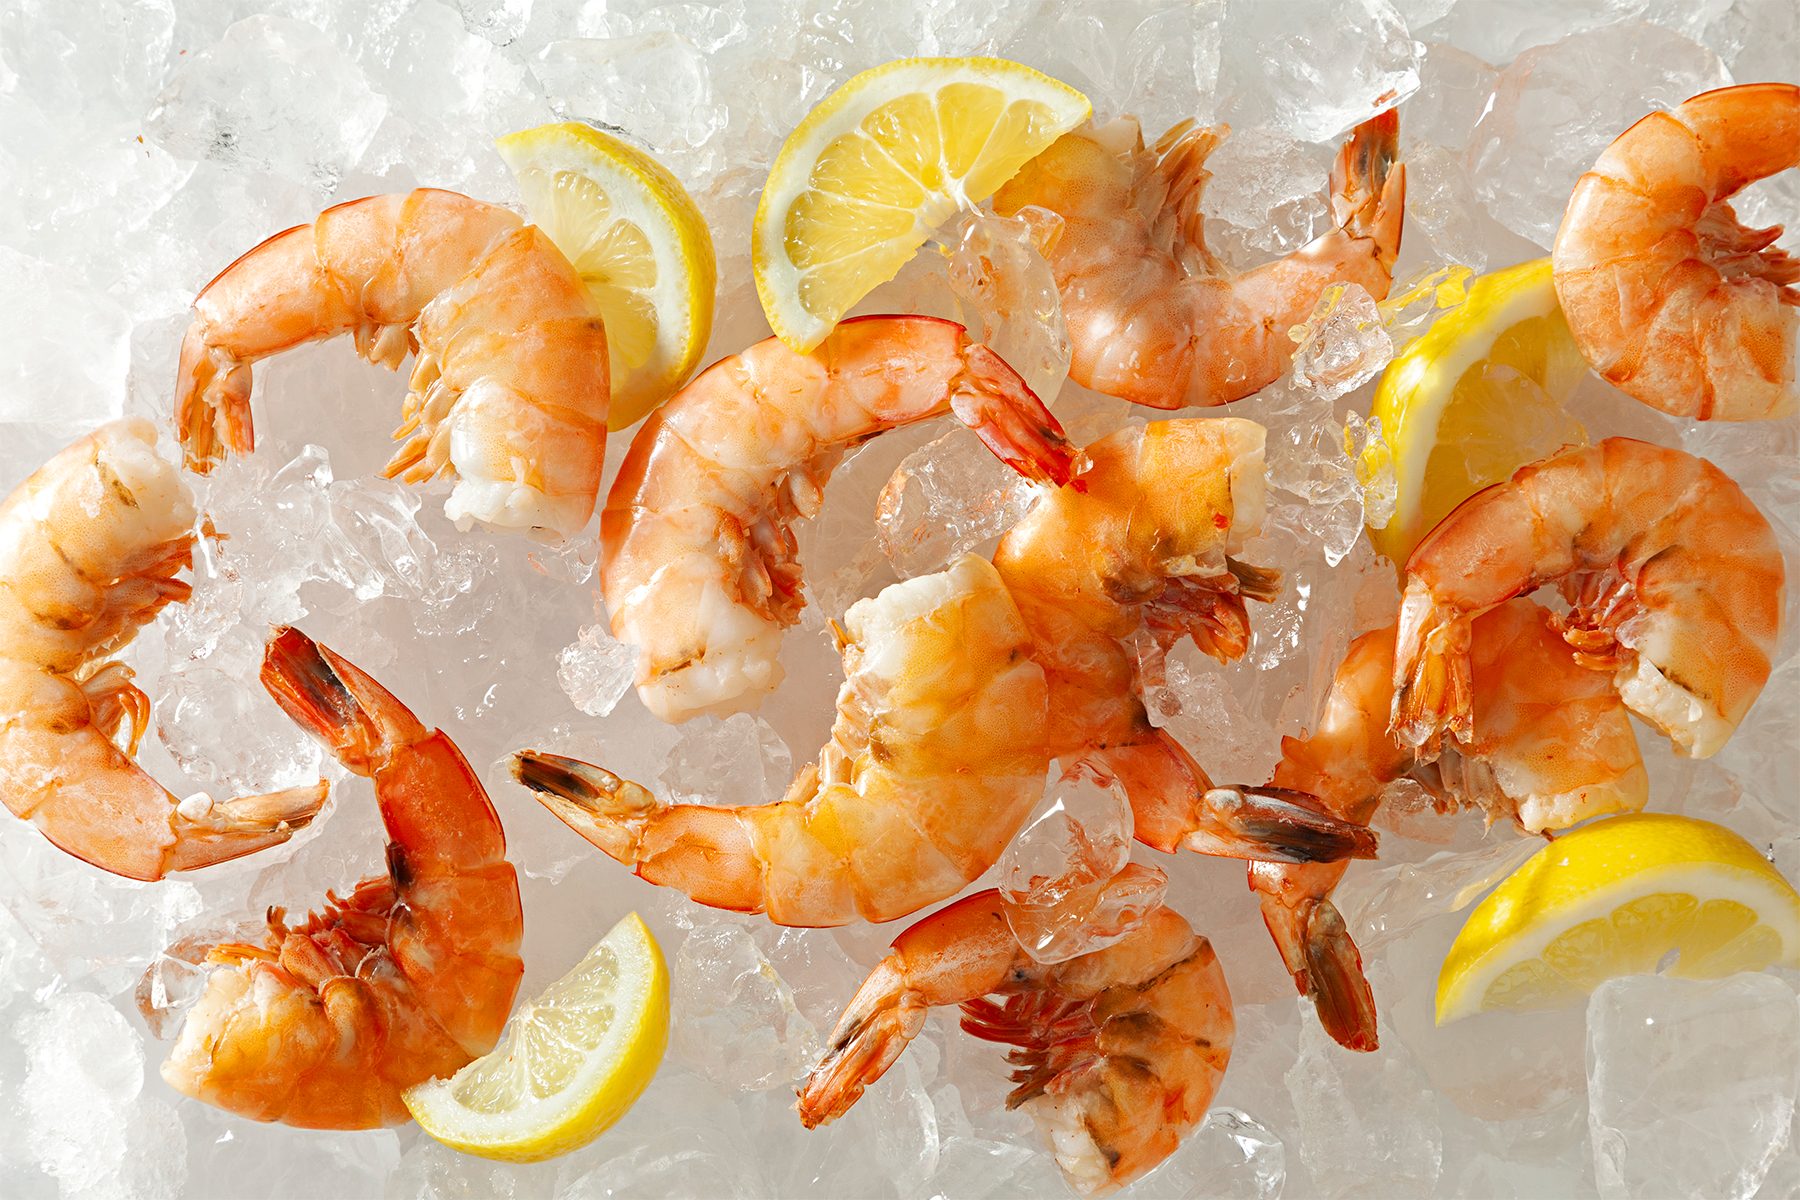 Peeled shrimp with tails on are arranged on a bed of crushed ice, accompanied by lemon wedges. The scene is brightly lit, showcasing the fresh, vibrant colors of the shrimp and lemons.